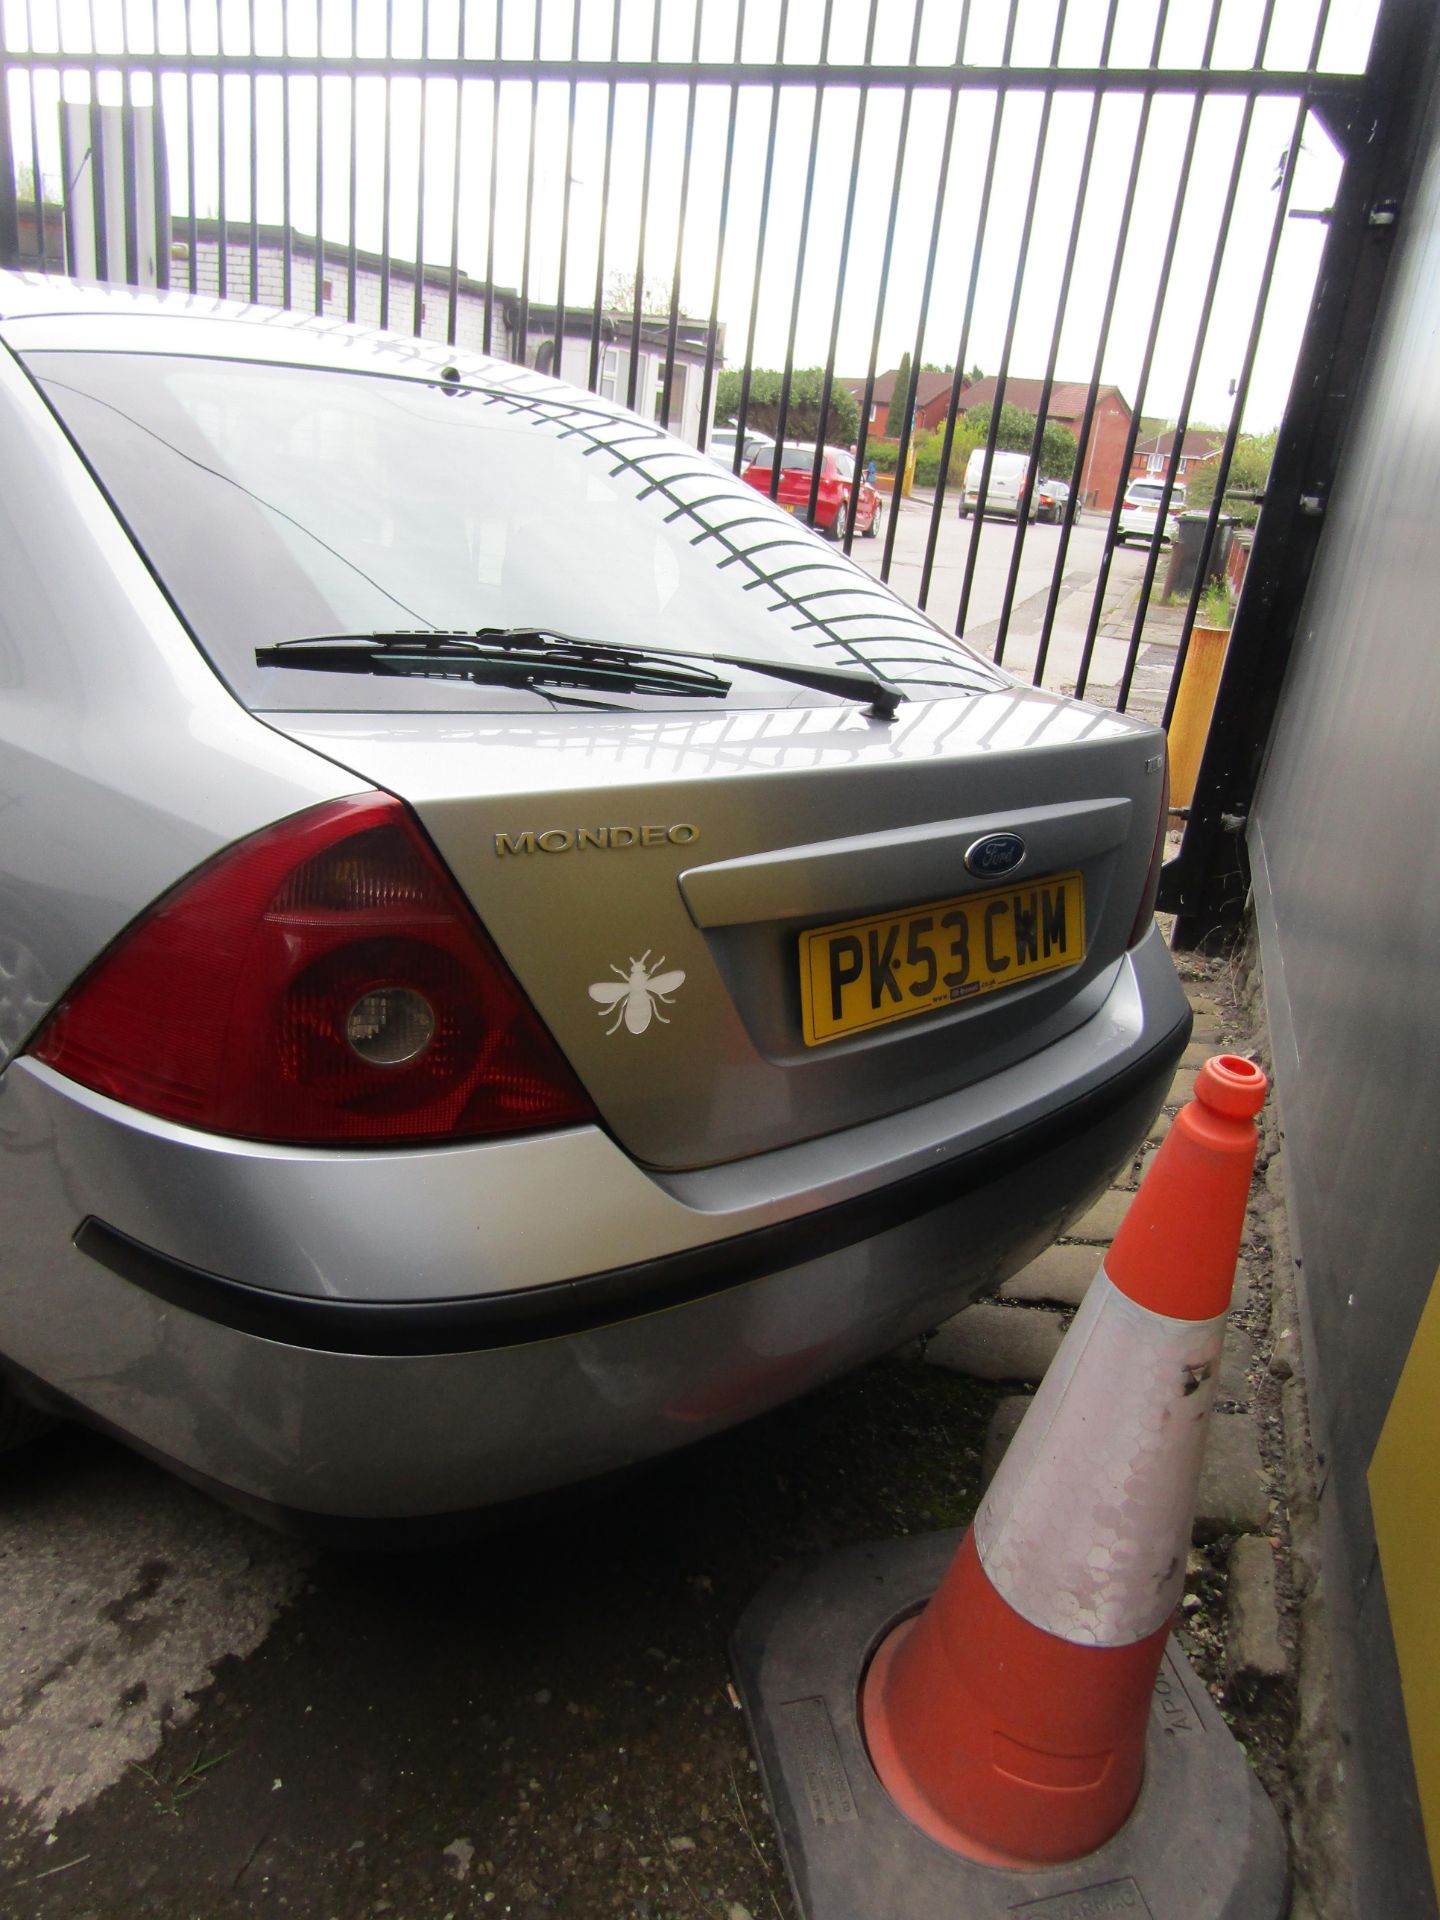 2003 Ford Mondeo Graphite 2.0 TDCI, MOT until 13th September, 89,010 miles (unchecked) comes with - Image 2 of 16